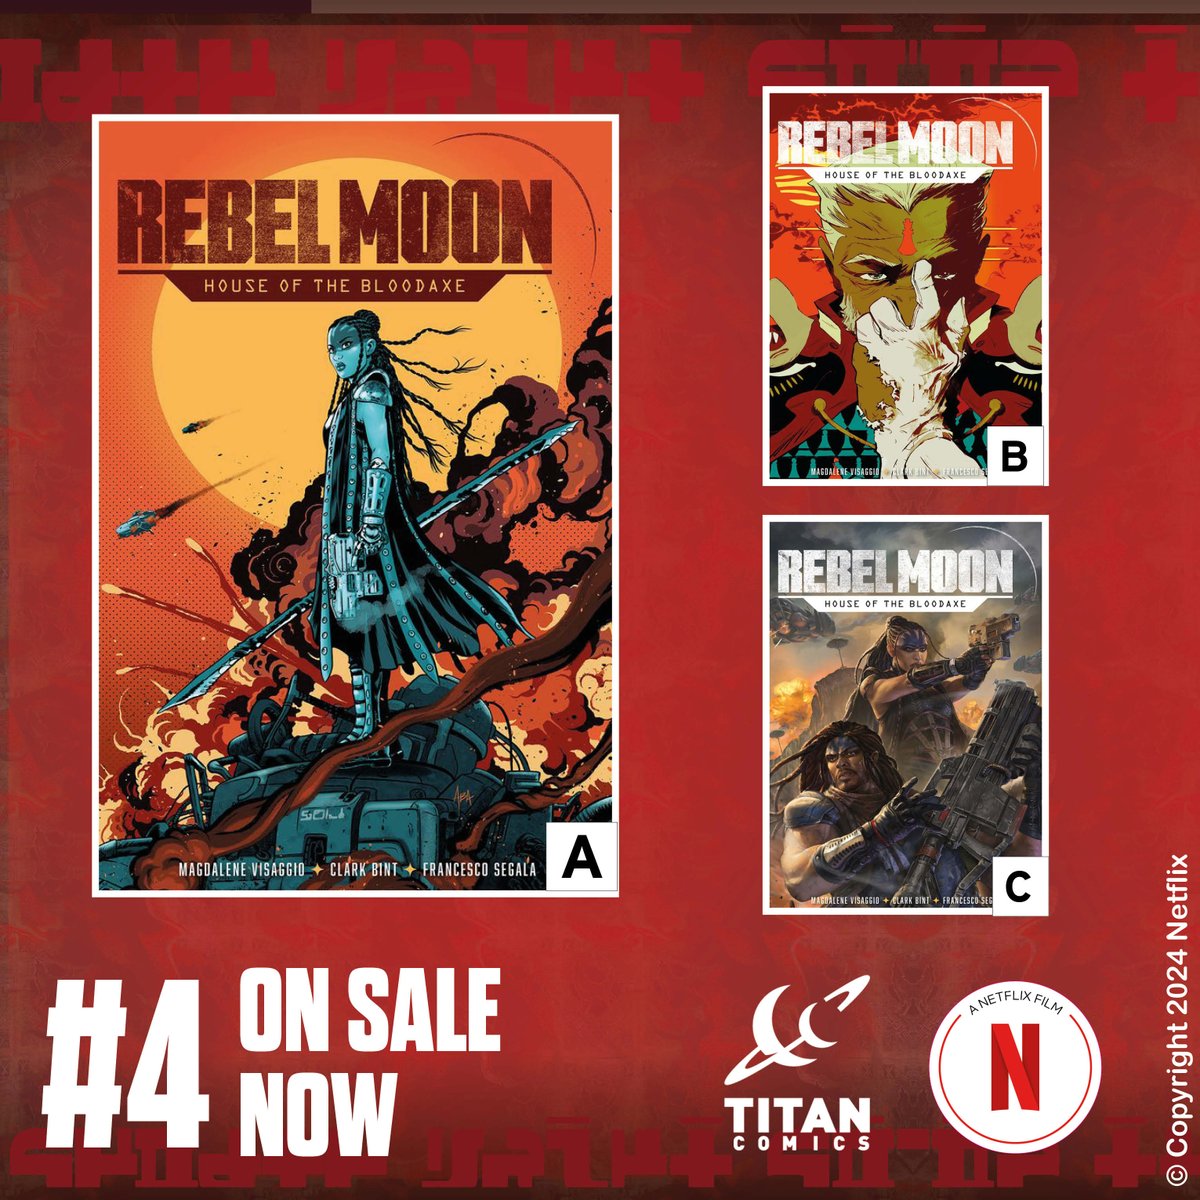 On sale NOW is REBEL MOON: HOUSE OF THE BLOODAXE #4 from @magsvisaggs (W) and @clarkbintart (A), story by Zack Snyder. The final issue of the prequel series to the hit blockbuster by @ZackSnyder is here! #rebelmoon #zacksnyder